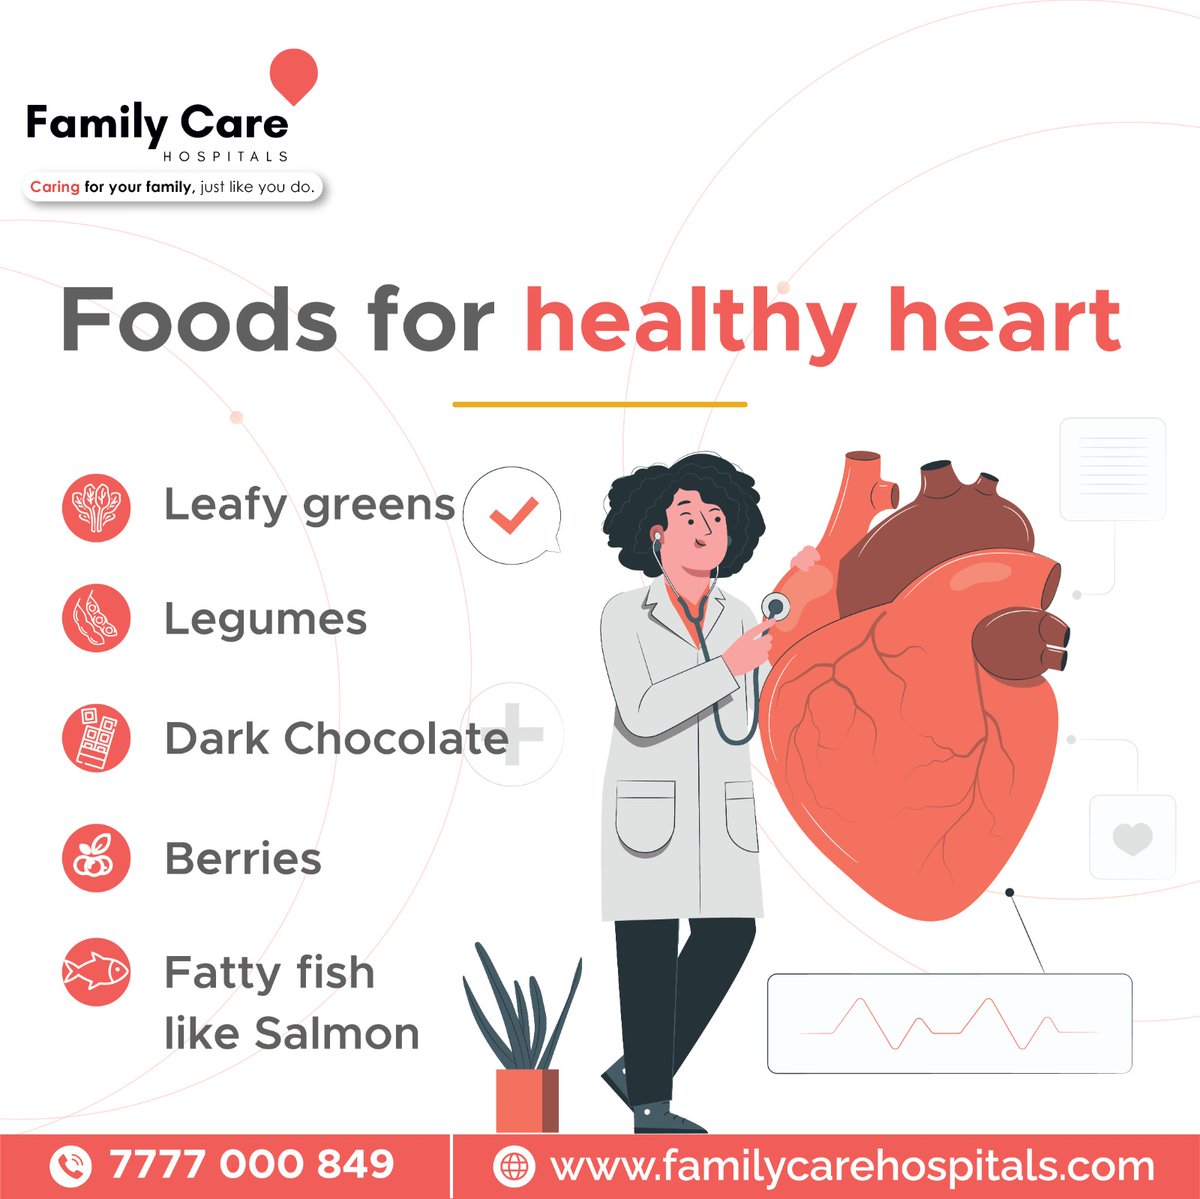 Do you want to keep your heart healthy? 

Begin with your diet! For more information contact us @ +91 7777 000 849

#familycarehospitals #heartfood #healthyeating #PristynCare #healthydiet #eatwellbewell #foodforhealth #hearthealthyfoods #healthylifestyle #healthandwellness